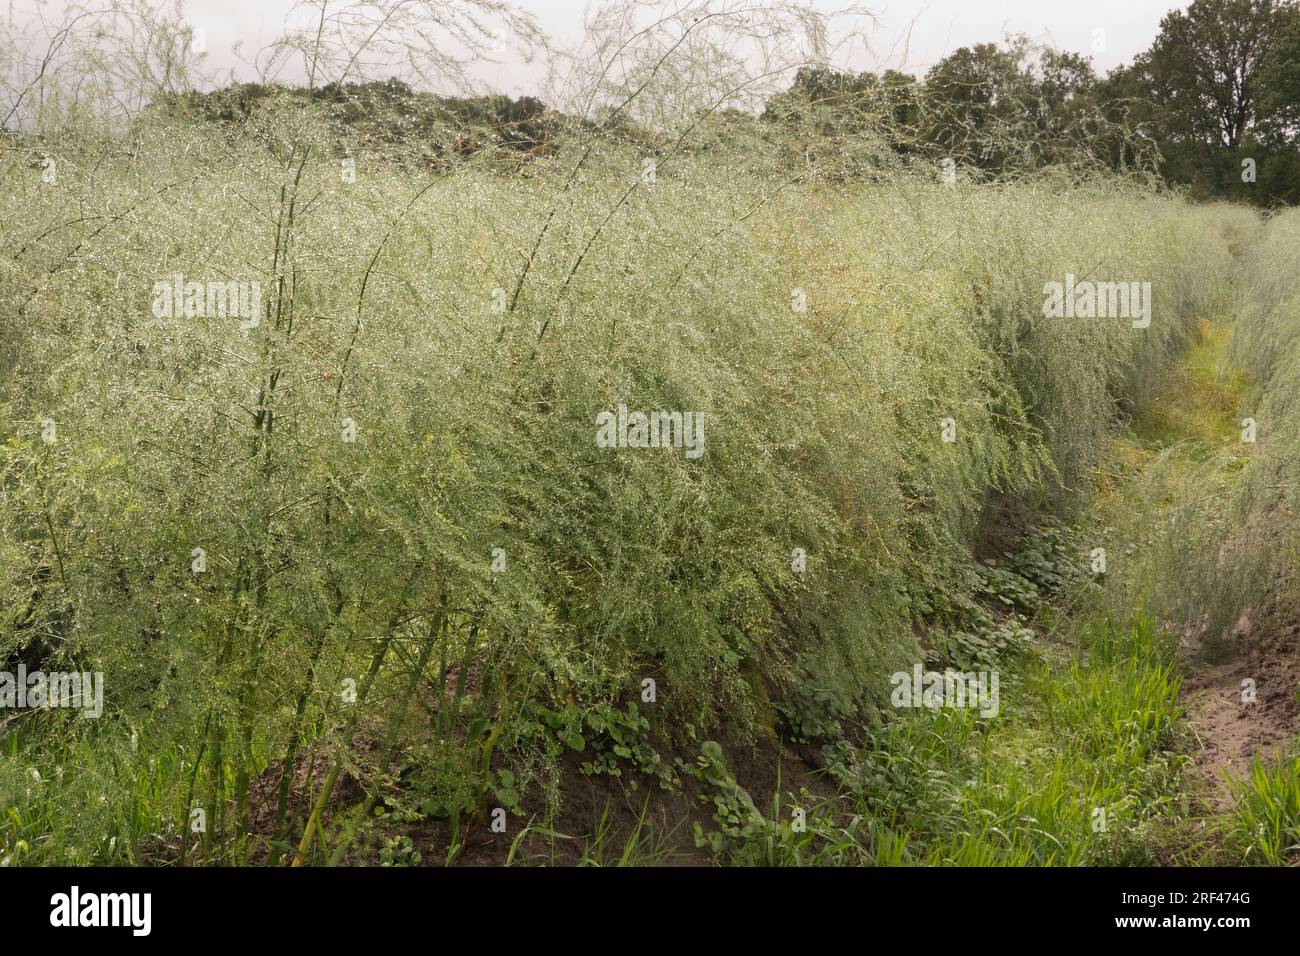 Field with rows of Asparagus, plants in fern stage, wet from the rain Stock Photo